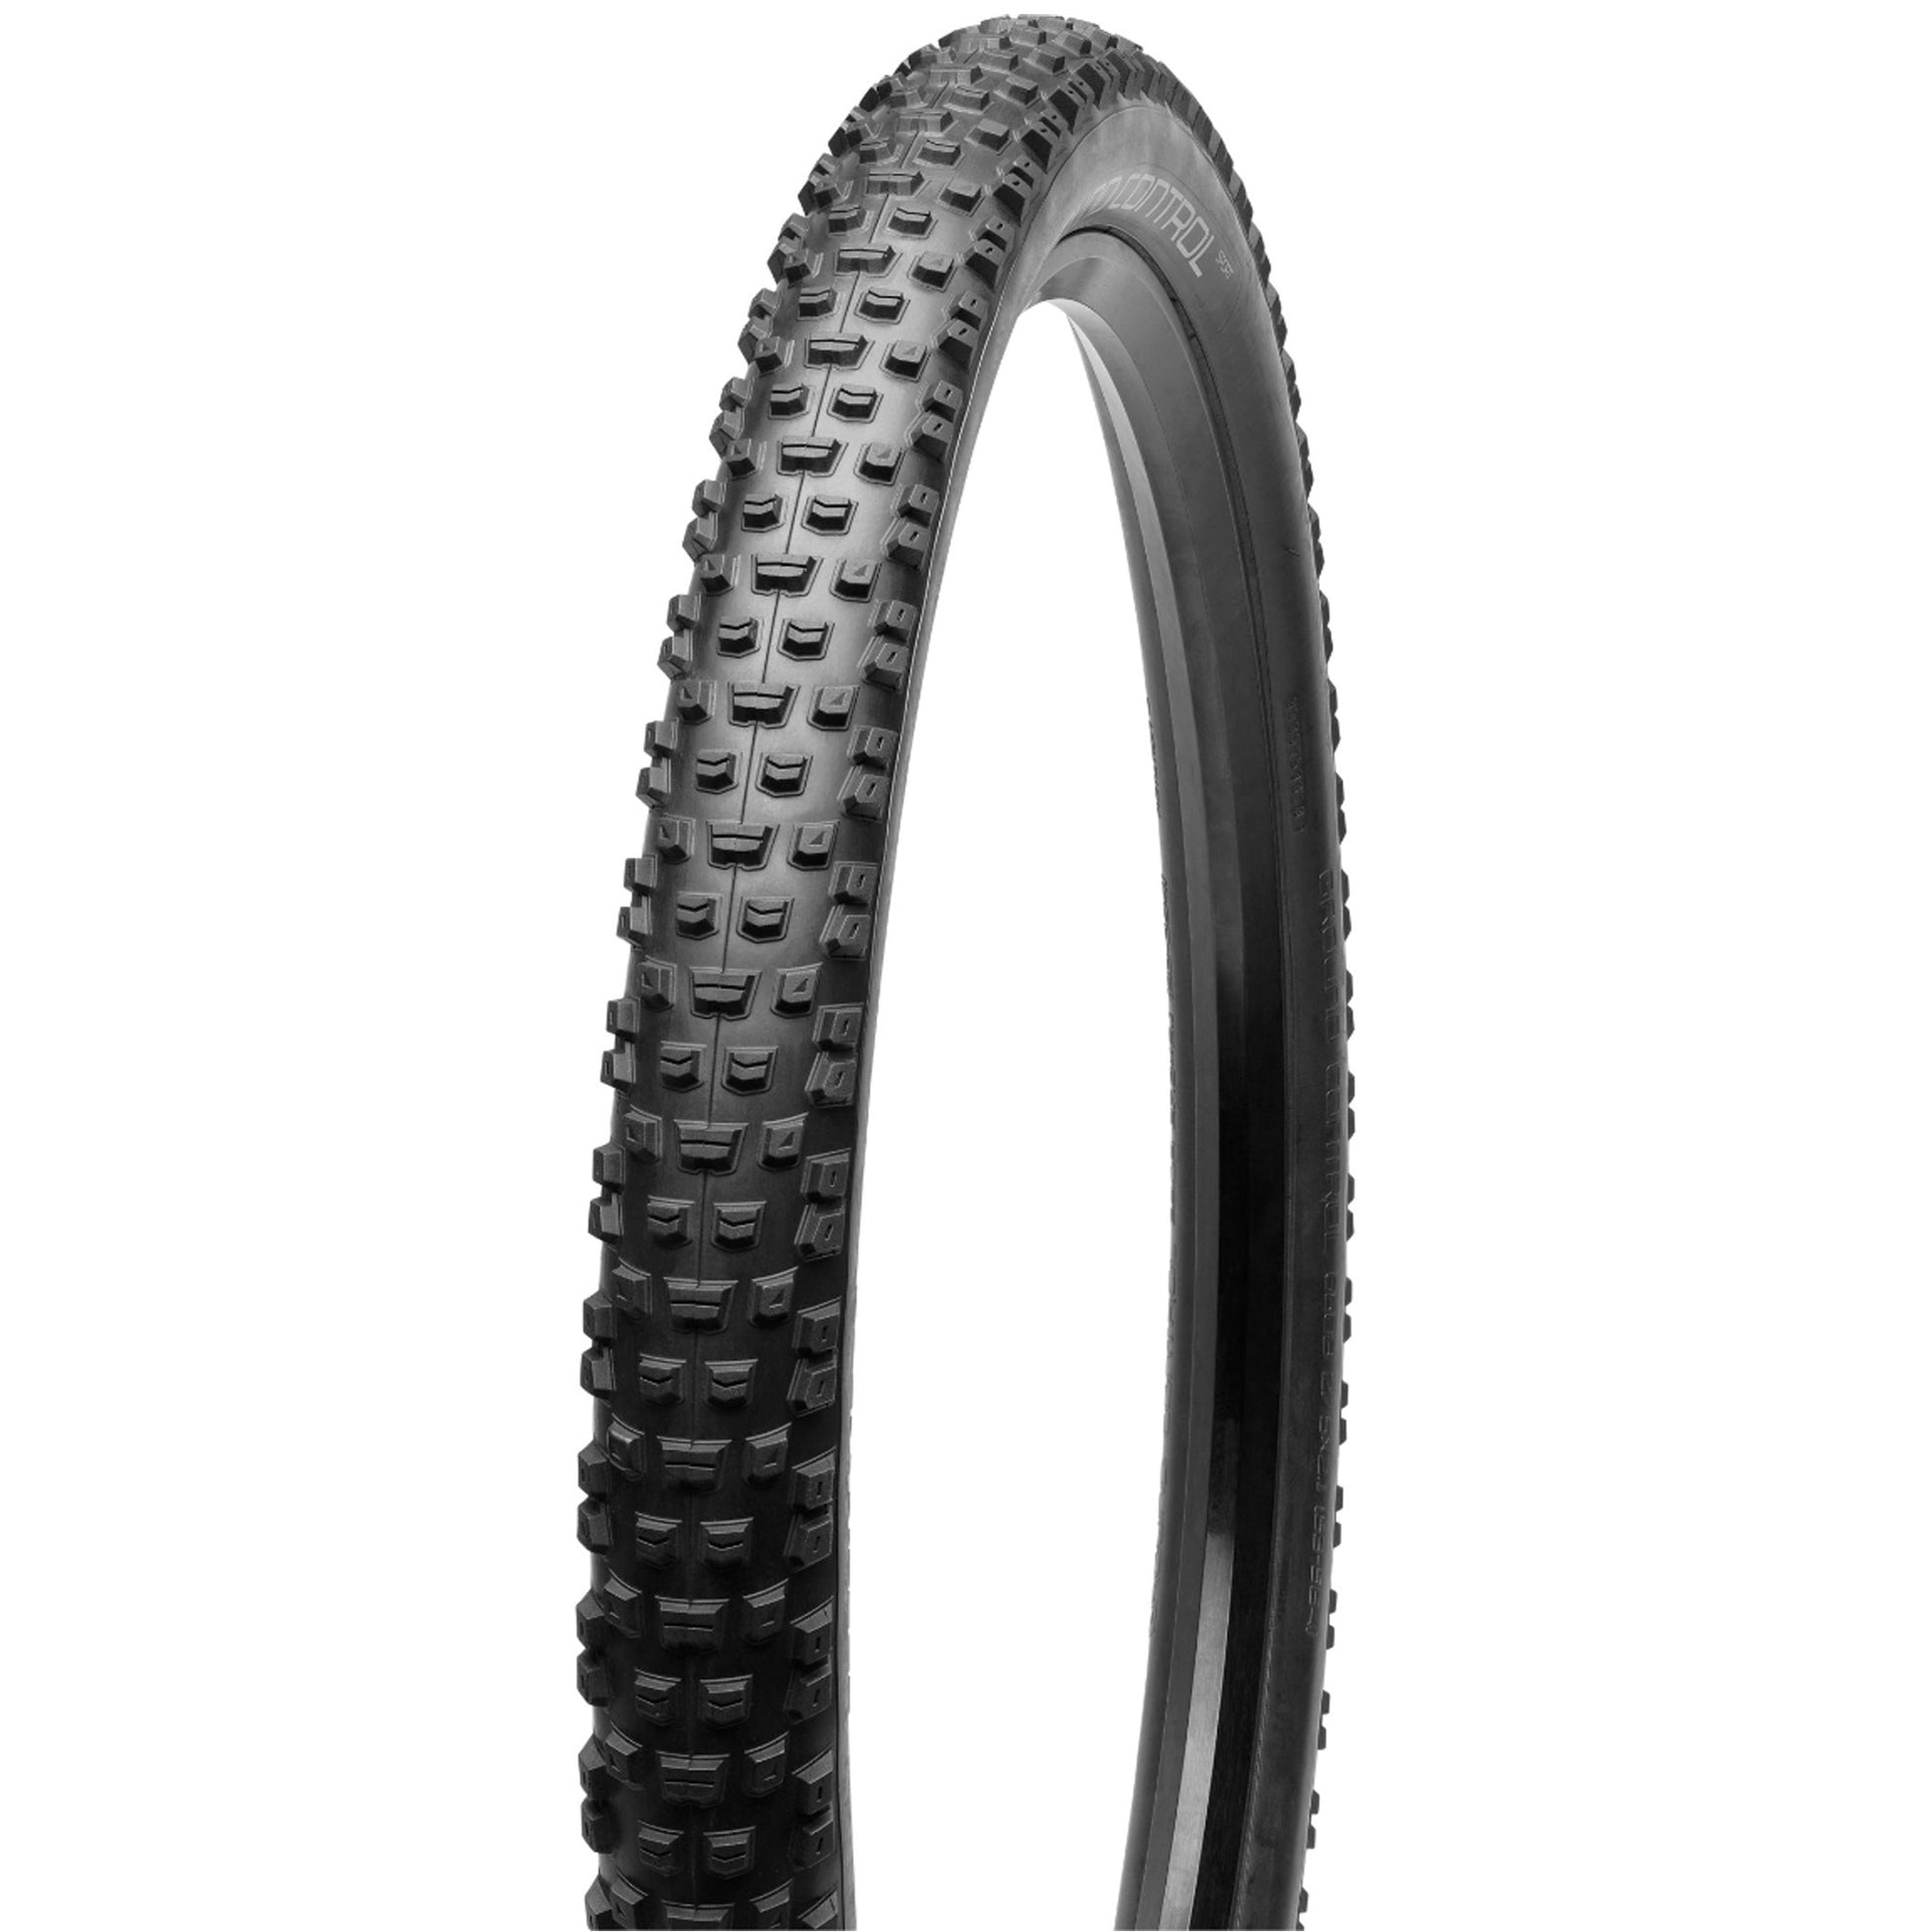 Specialized Ground Control Tubeless Ready MTB Tyre, 29" x 2.3", buy online at Woolys Wheels with free delivery for orders over $99.090